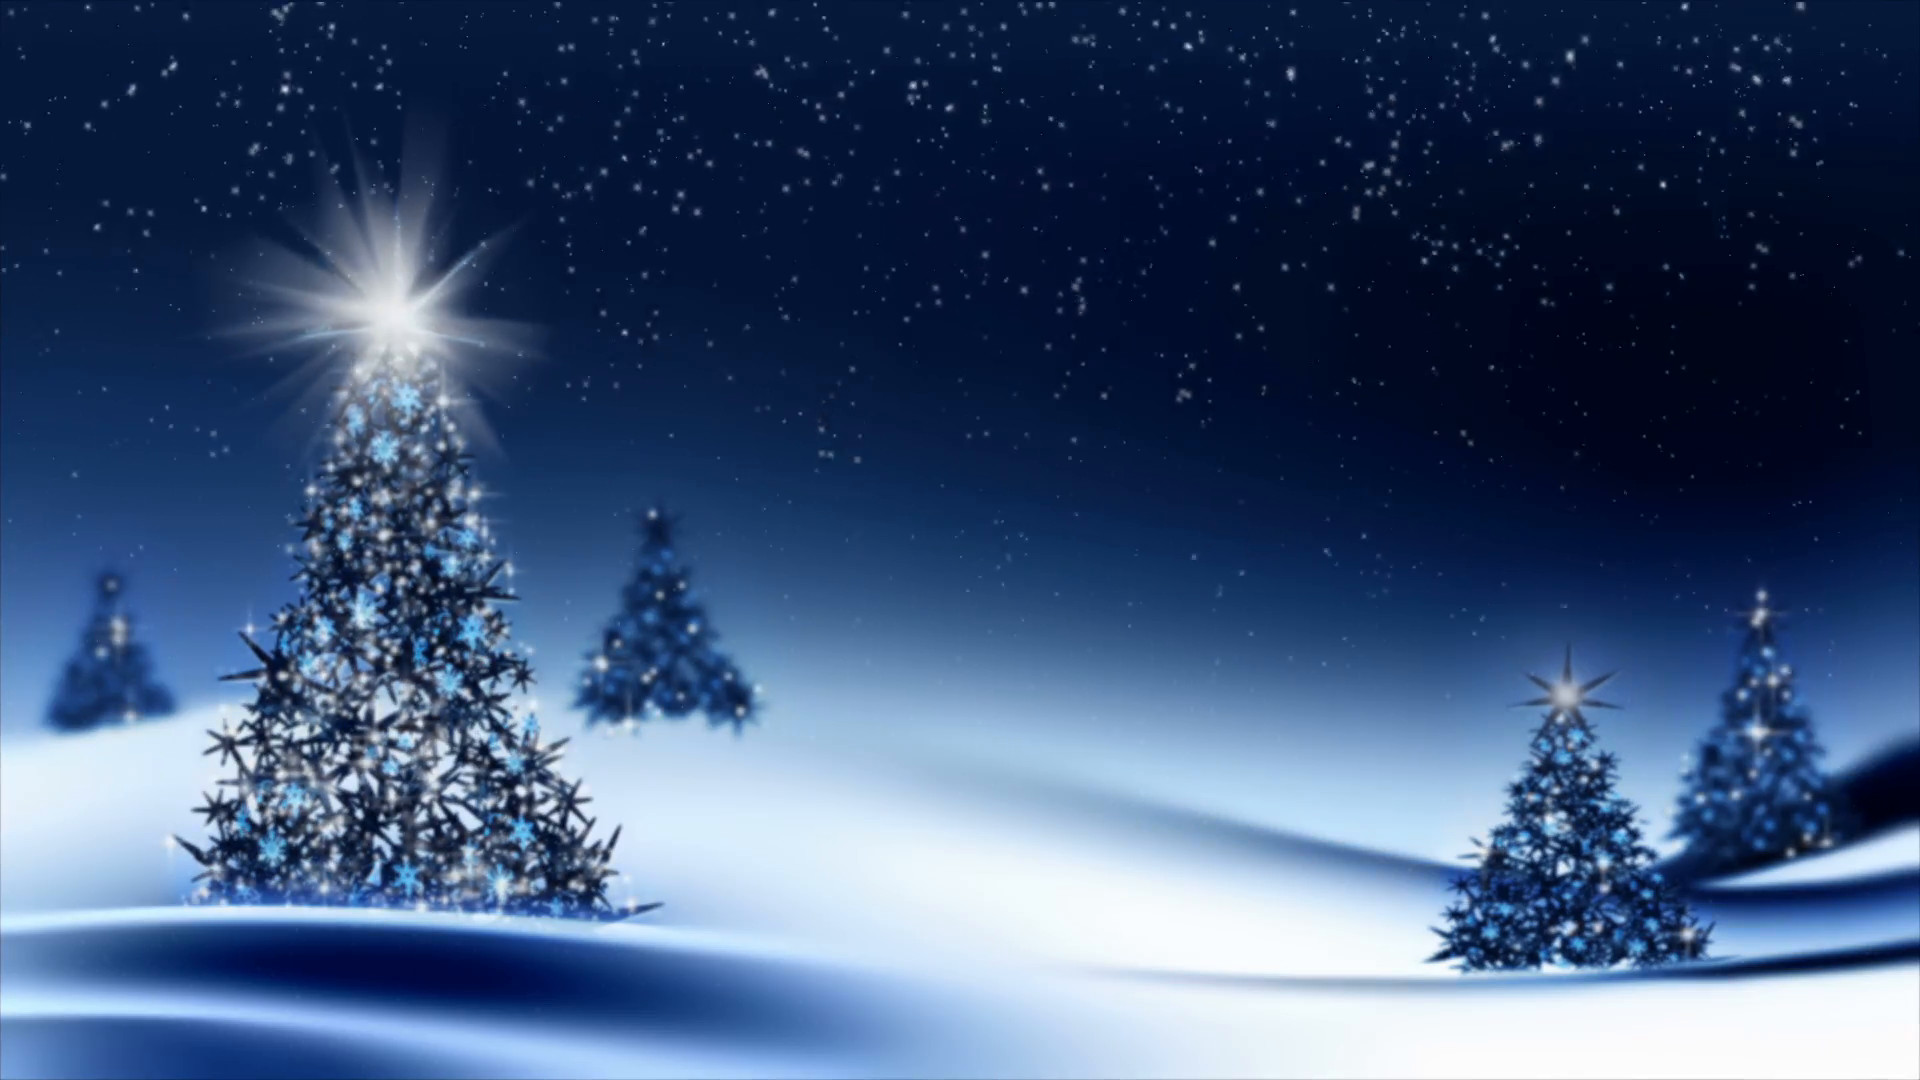 1920x1080 Sparkling decorated Christmas trees withs snowflakes, festive background  with stars, Christmas trees on blue